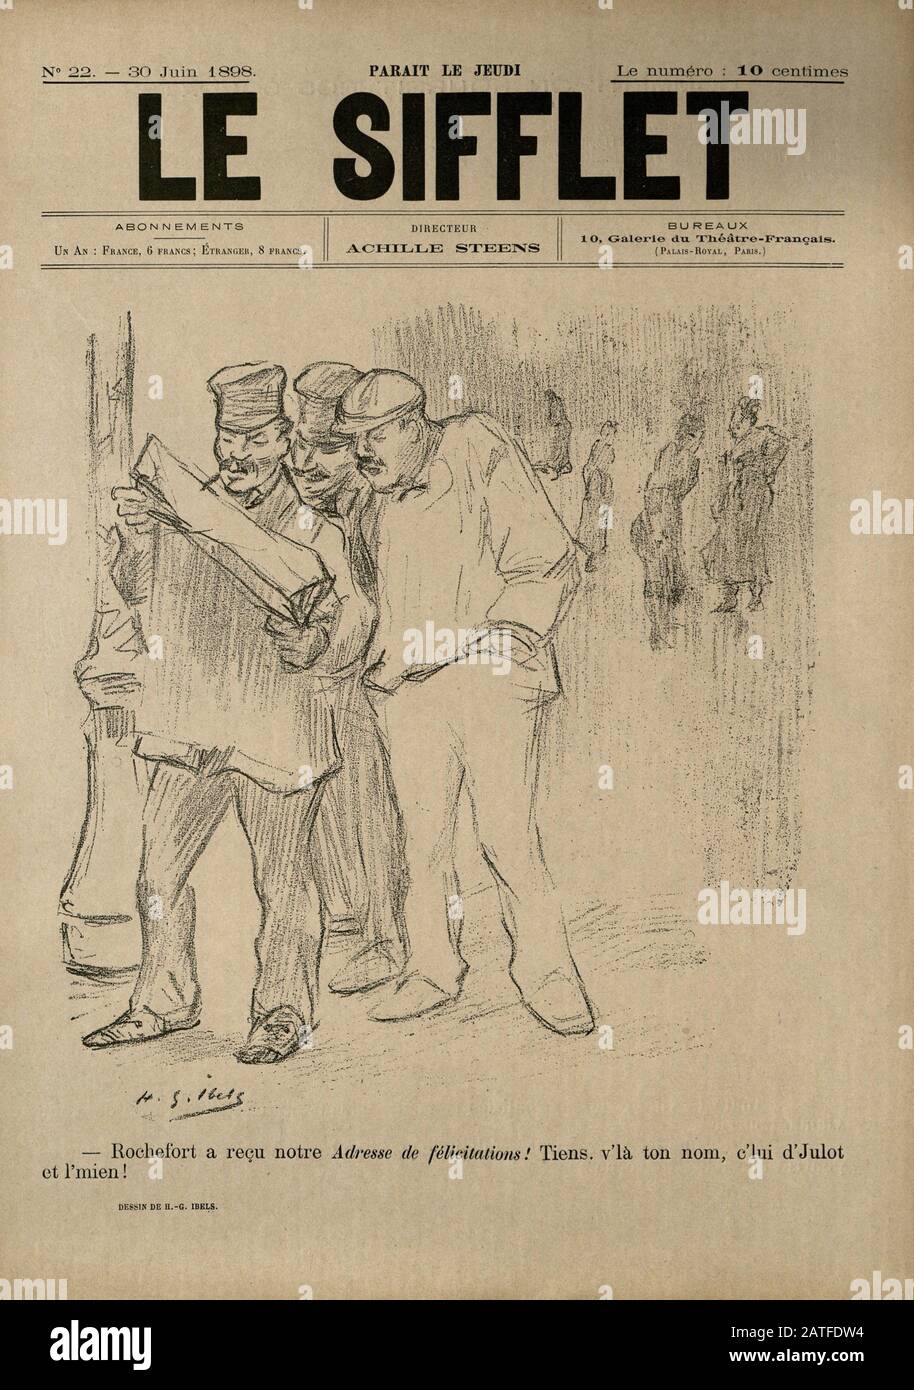 The Dreyfus Affair 1894-1906 - Le Sifflet, June 29, 1898 -  French illustrated newspaper Stock Photo